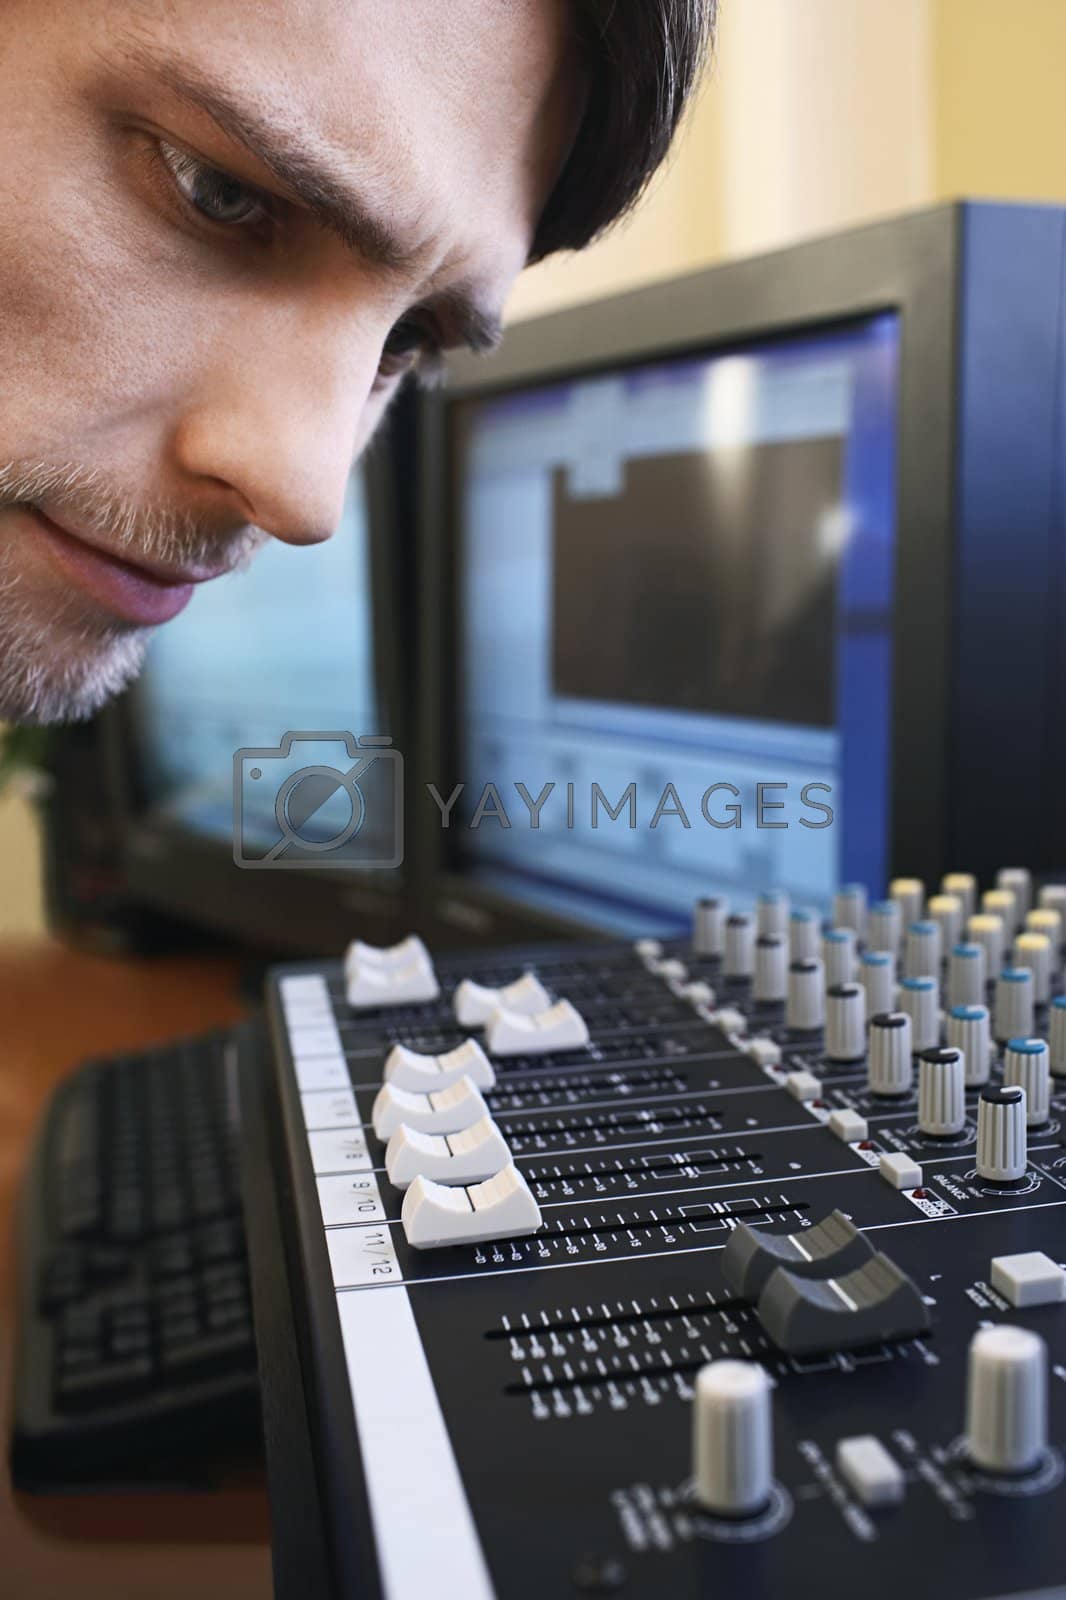 Royalty free image of Man Looking at Levels on Mixing Board by moodboard